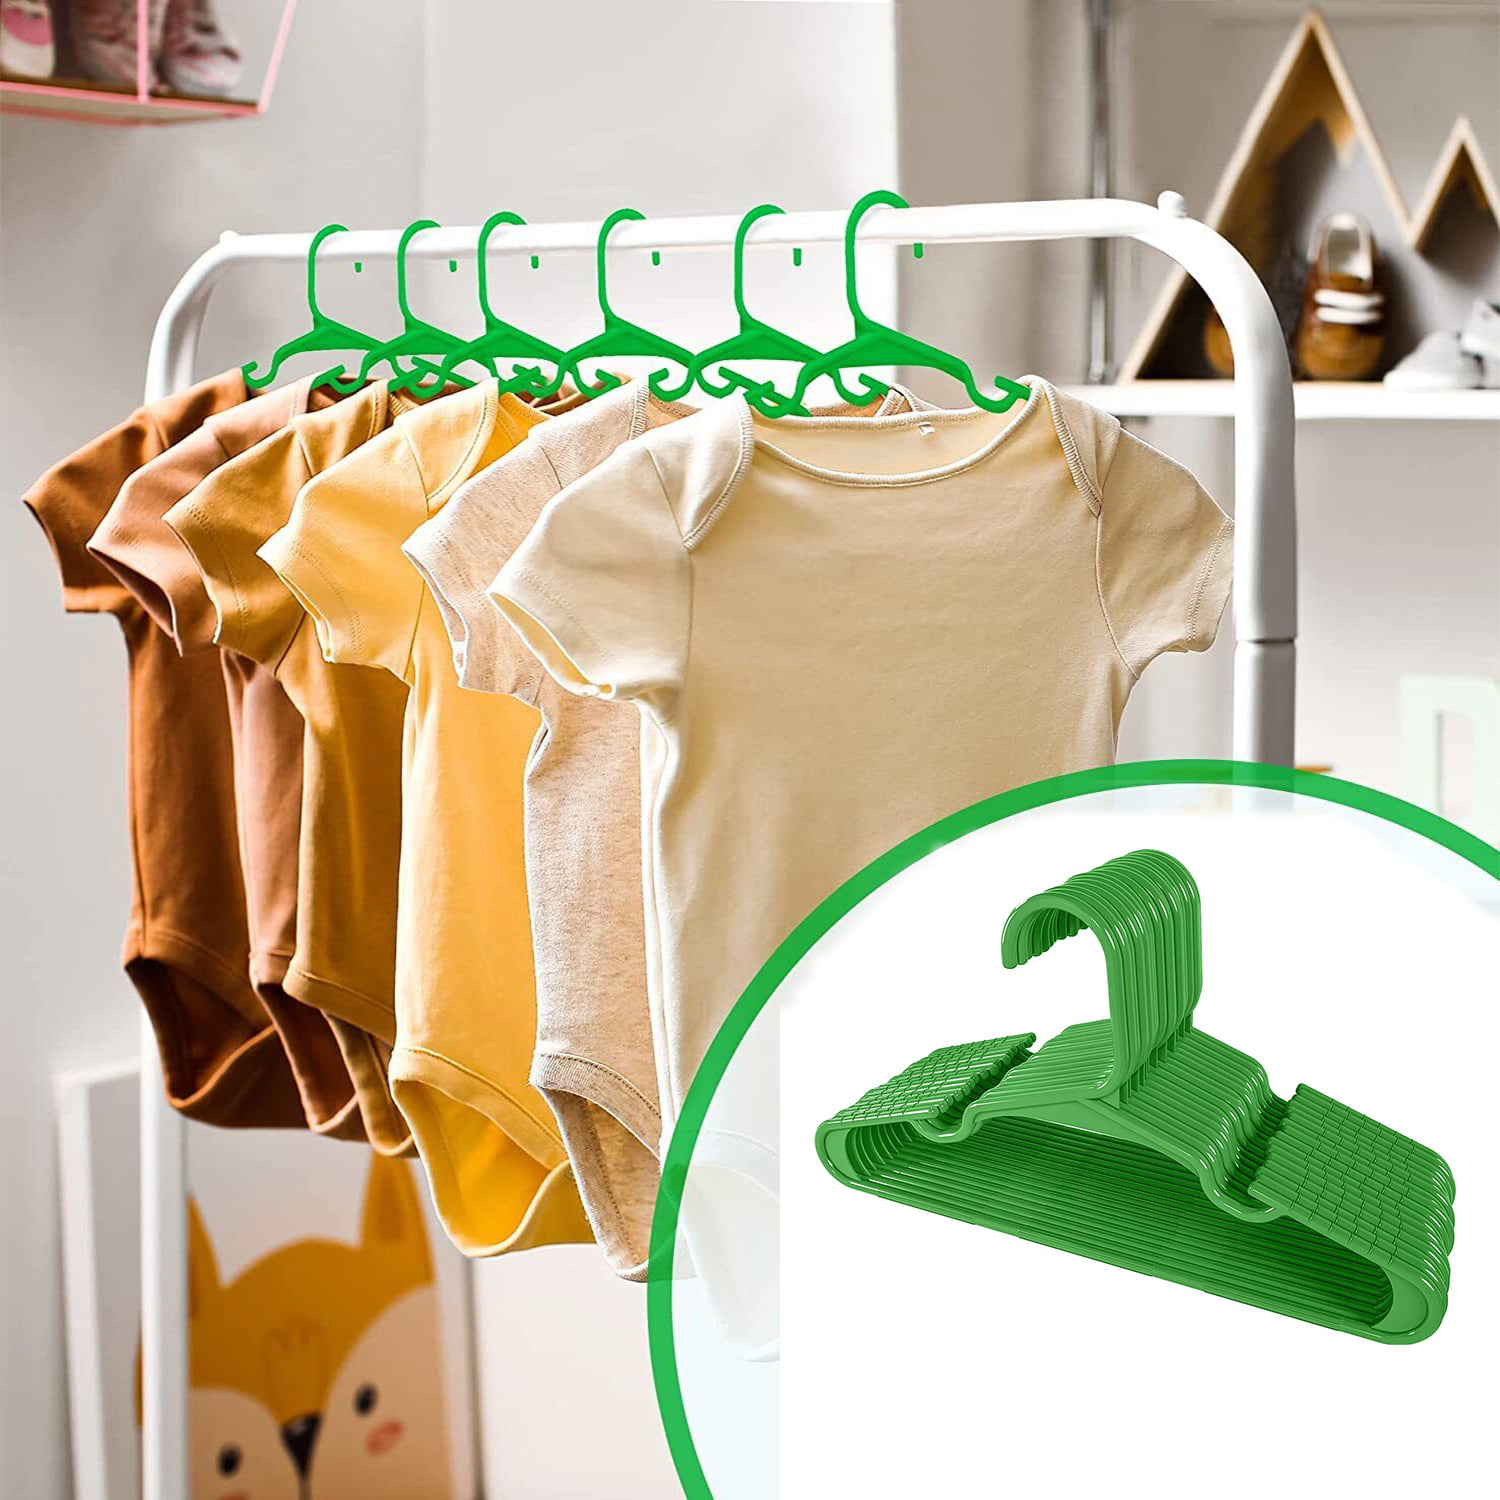 30 Pack Kids Hangers,Childrens Durable Plastic Infant Hangers for Kids  Clothes,Non-Slip Baby Clothes Hangers,Extensible Toddler Hangers for  Laundry